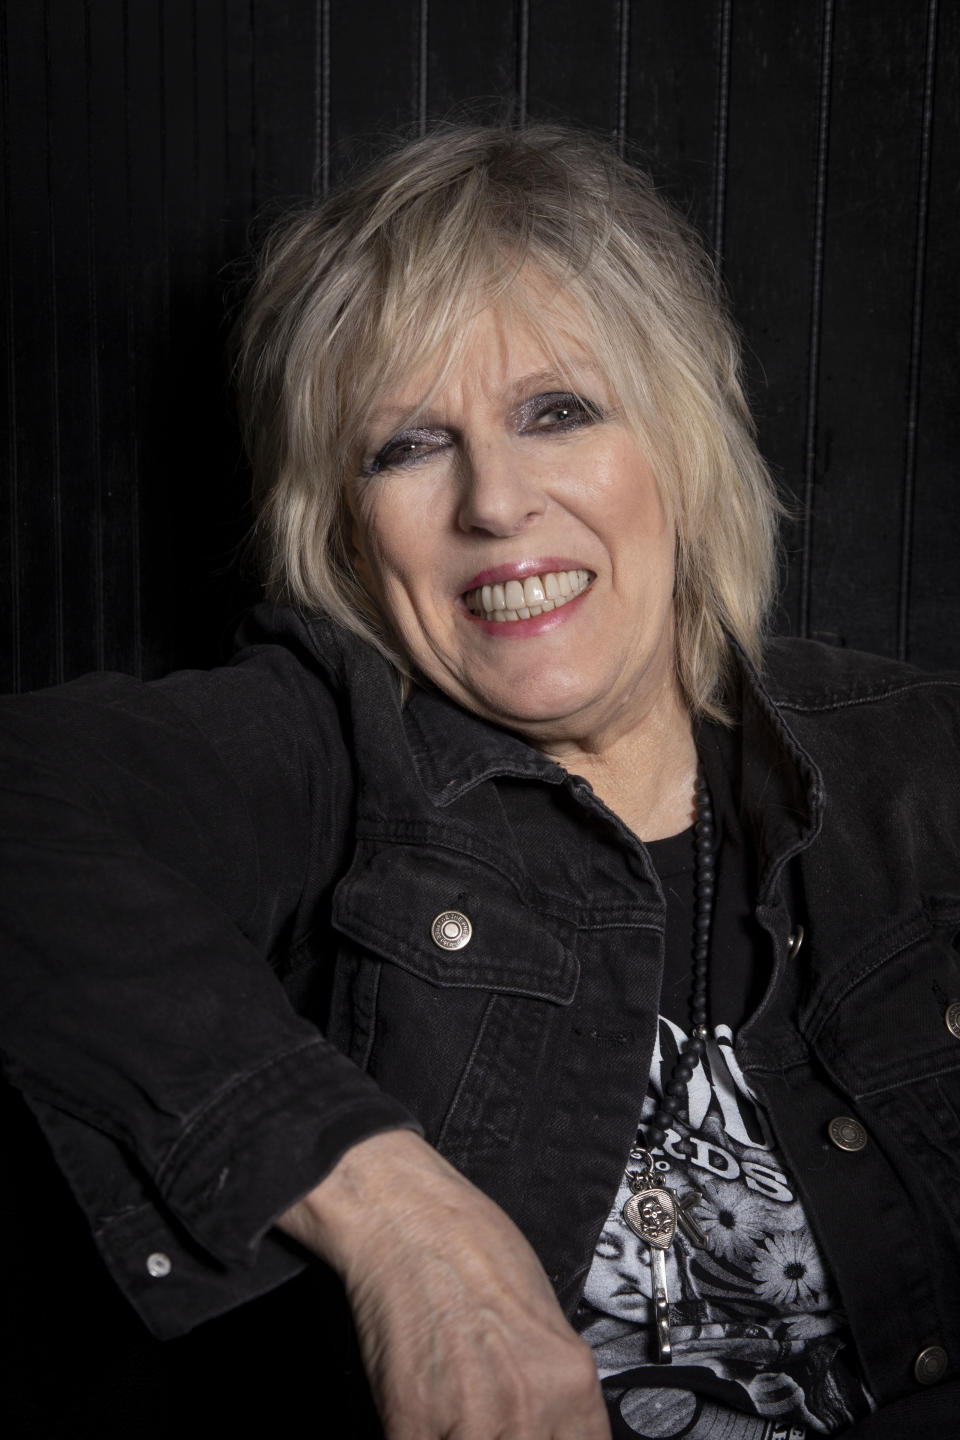 Lucinda Williams poses for a portrait on Friday, March 24, 2023 in New York to promote her book, “Don’t Tell Anybody the Secrets I Told You," out April 25. (Photo by Andy Kropa/Invision/AP)